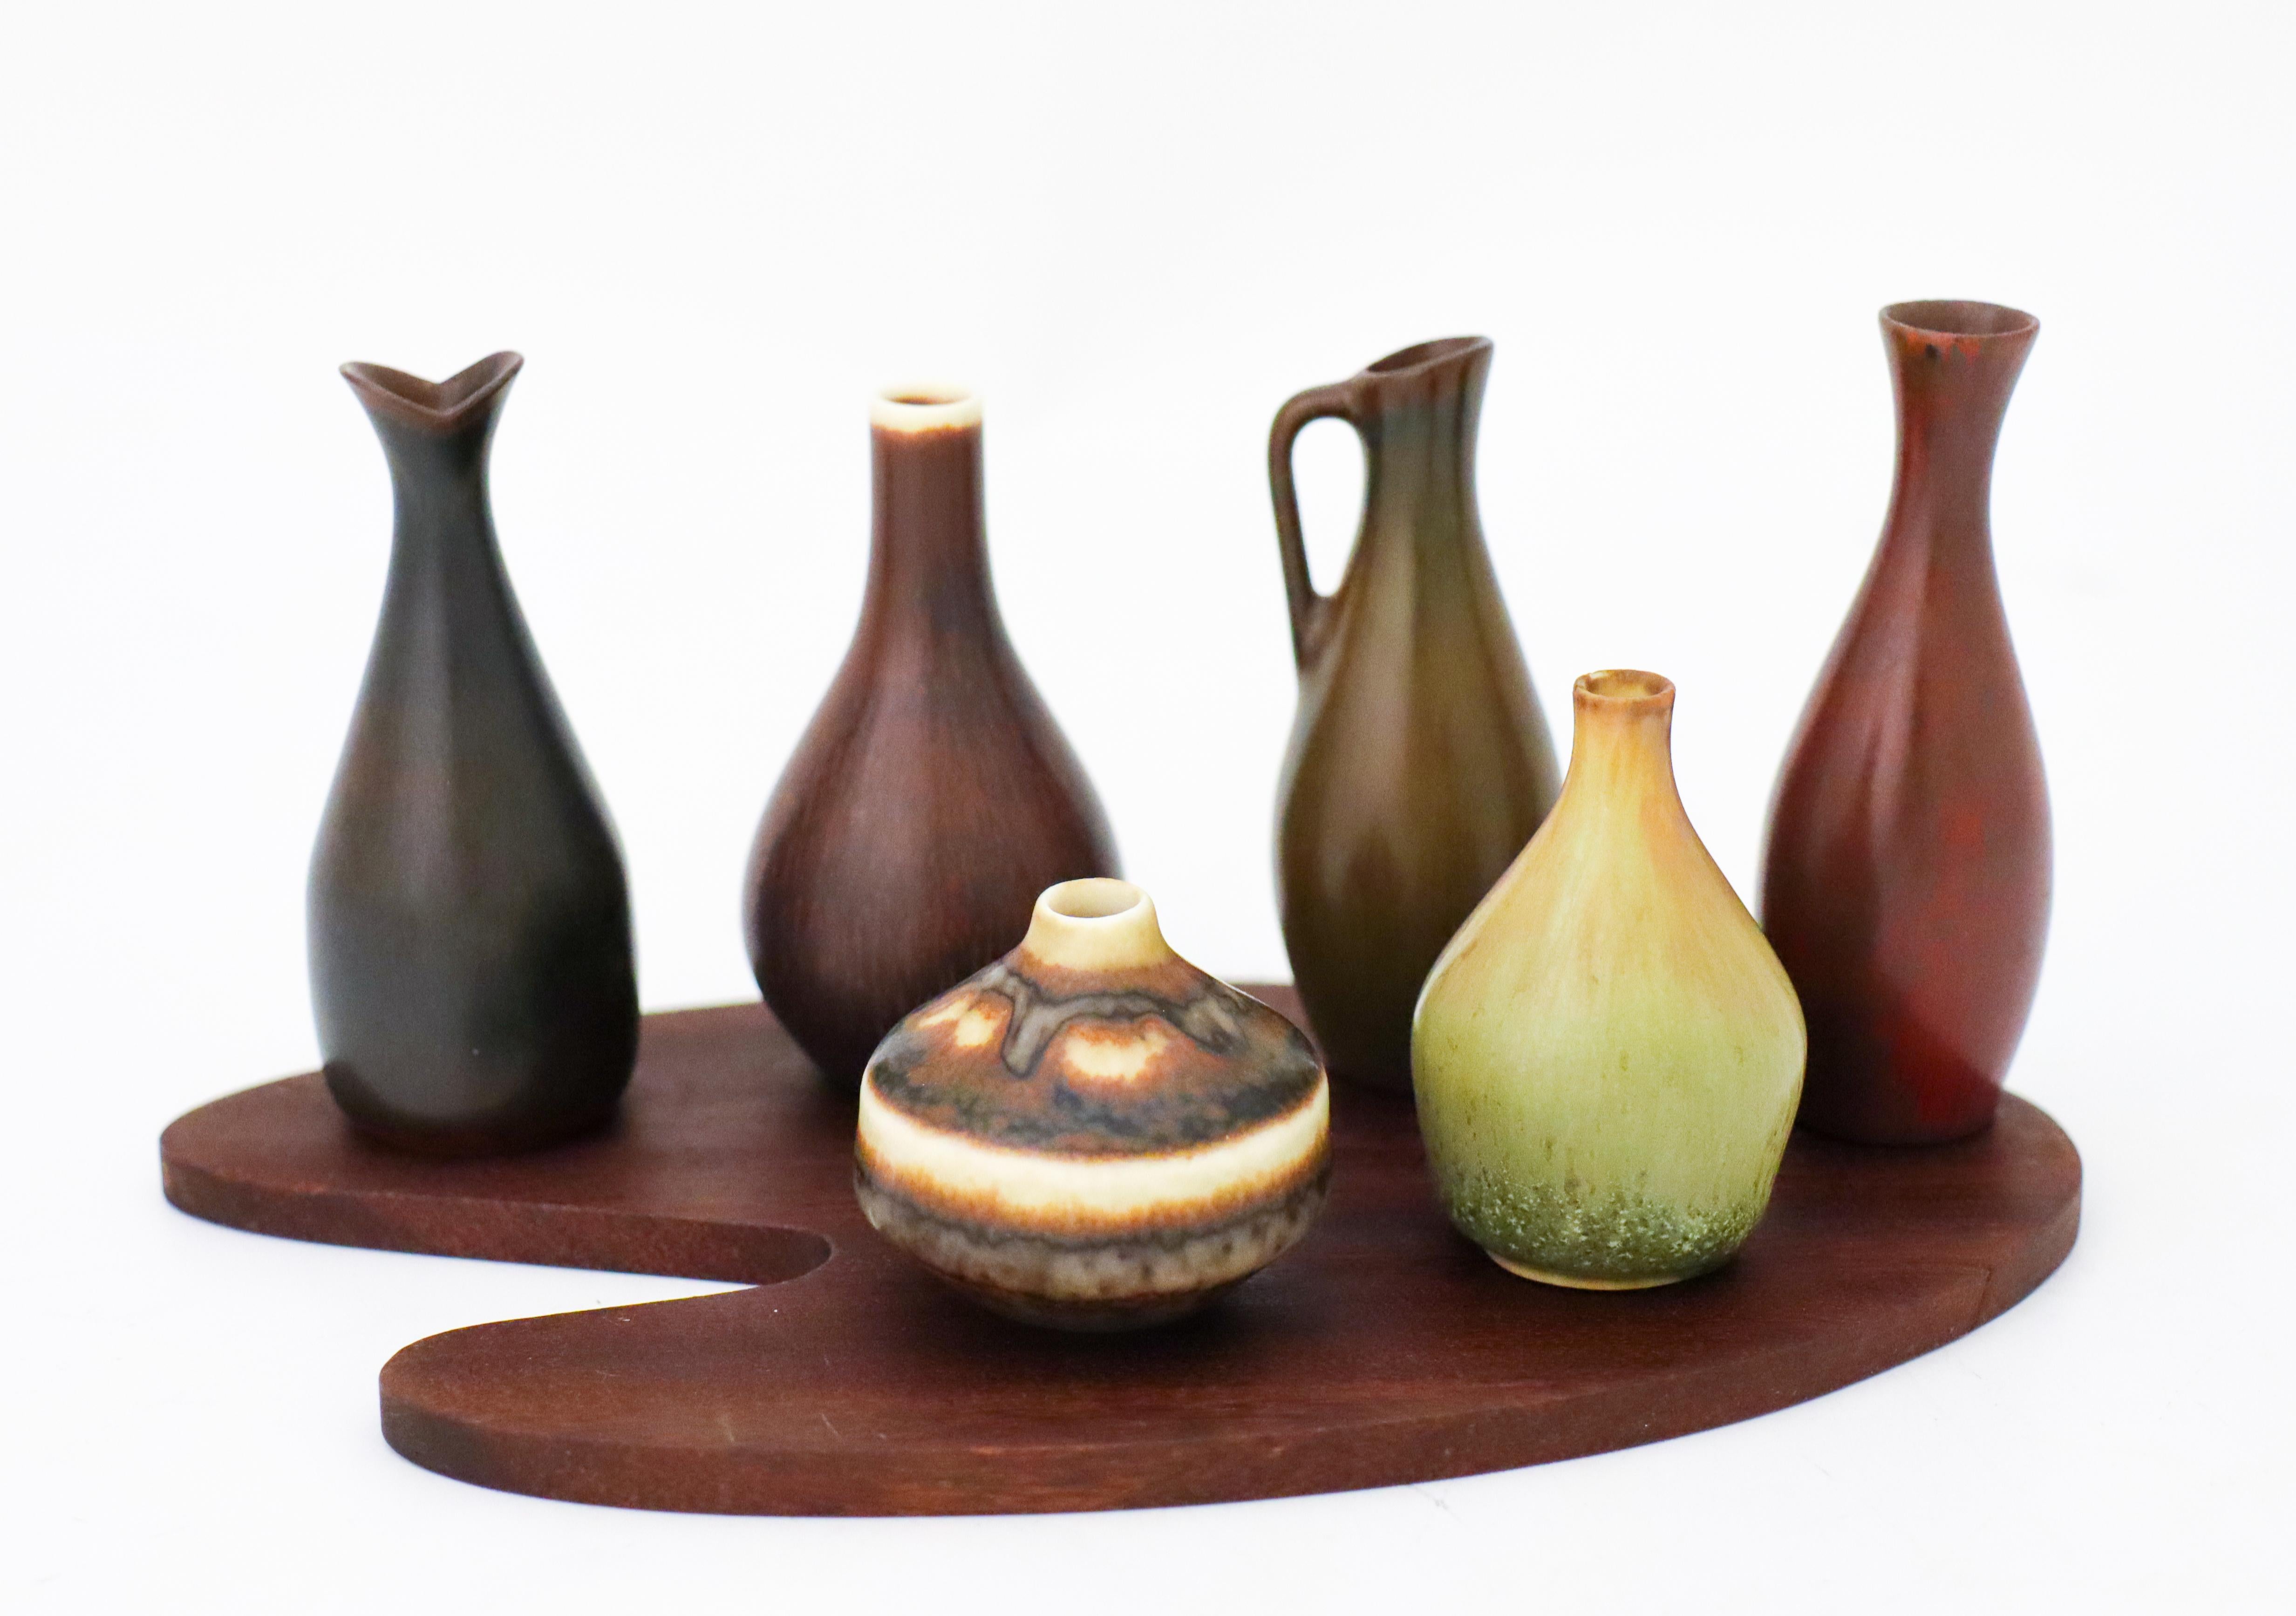 A set of 6 miniature vases on a wooden base designed by Carl-Harry Stålhane and one by Gunnar Nylund at Rörstrand, They are between 4 - 7.5 cm (1.6